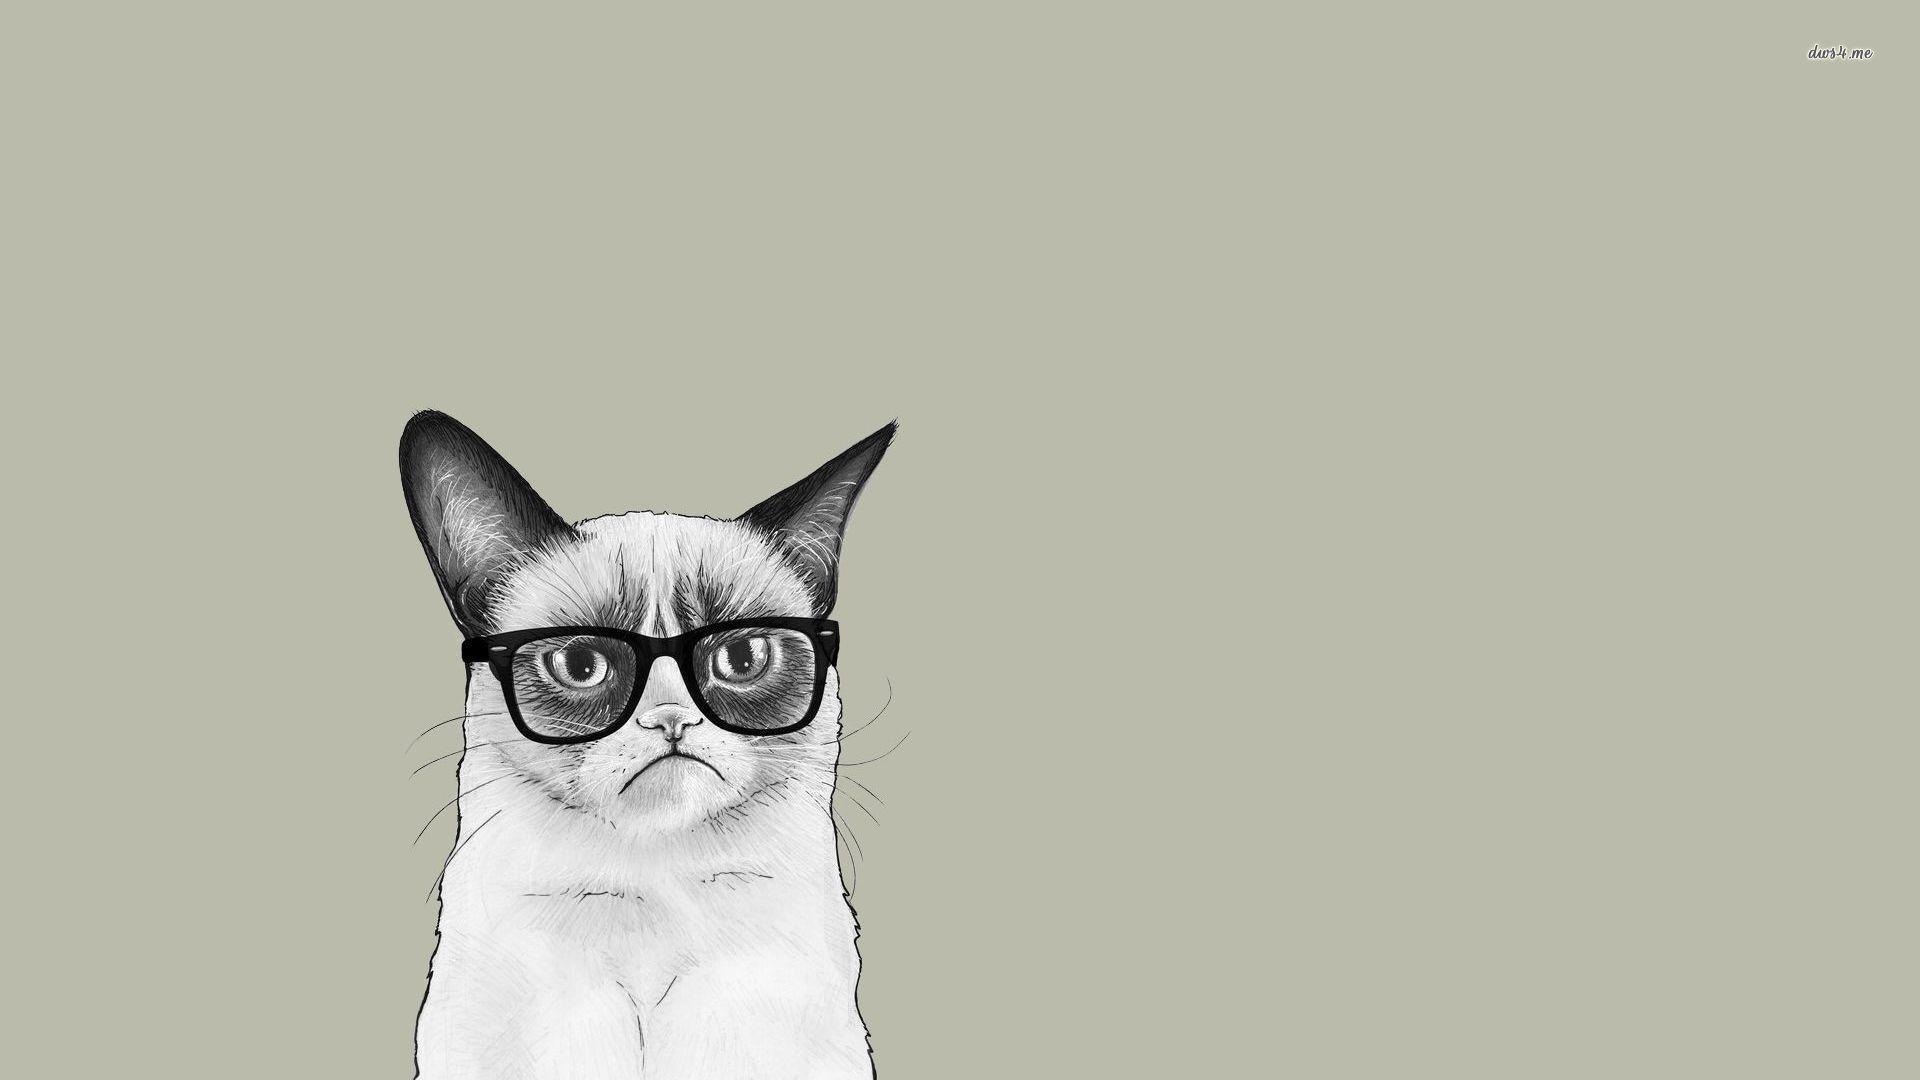 Grumpy Cat On The Bed Wallpaper. Best of High Quality Image